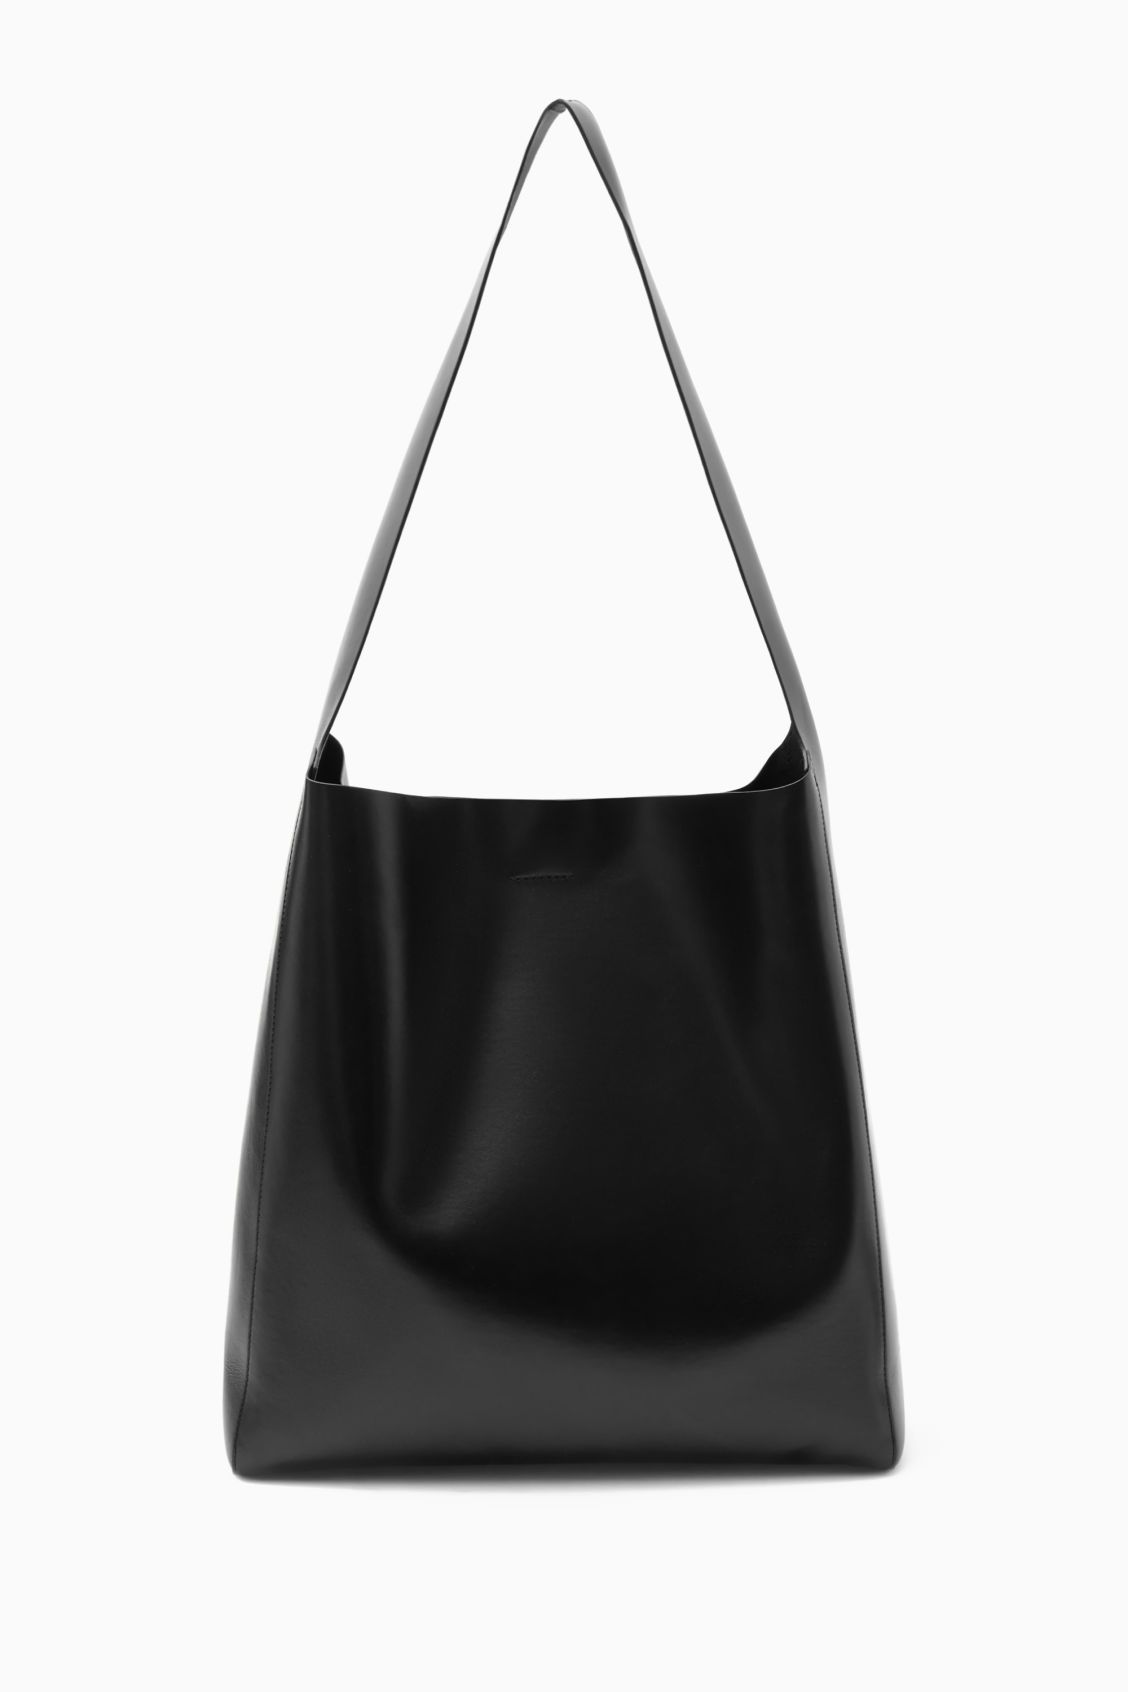 SLOUCHY SHOULDER BAG - LEATHER - BLACK - Accessories - COS | COS (US)